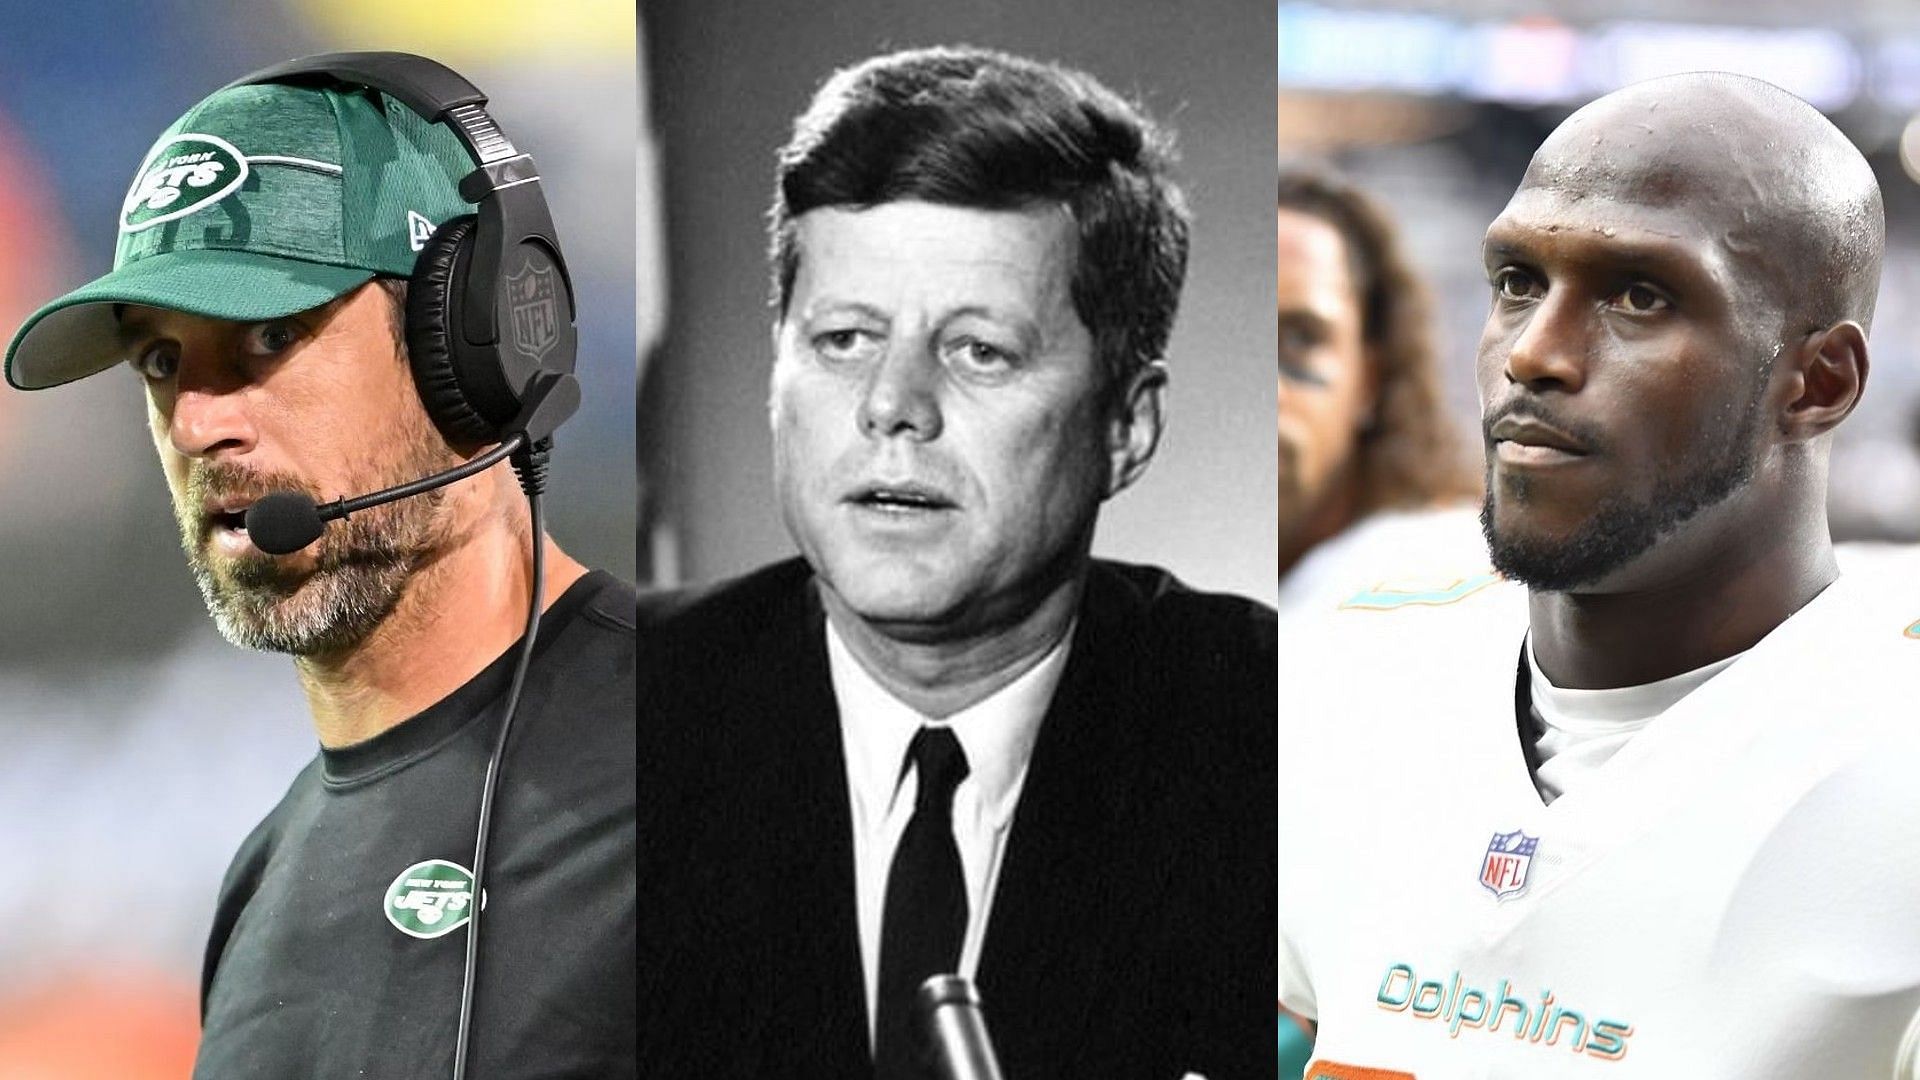 Aaron Rodgers gets pegged in &quot;JFK&quot; conspiracy - Courtesy of JFK library on Instagram